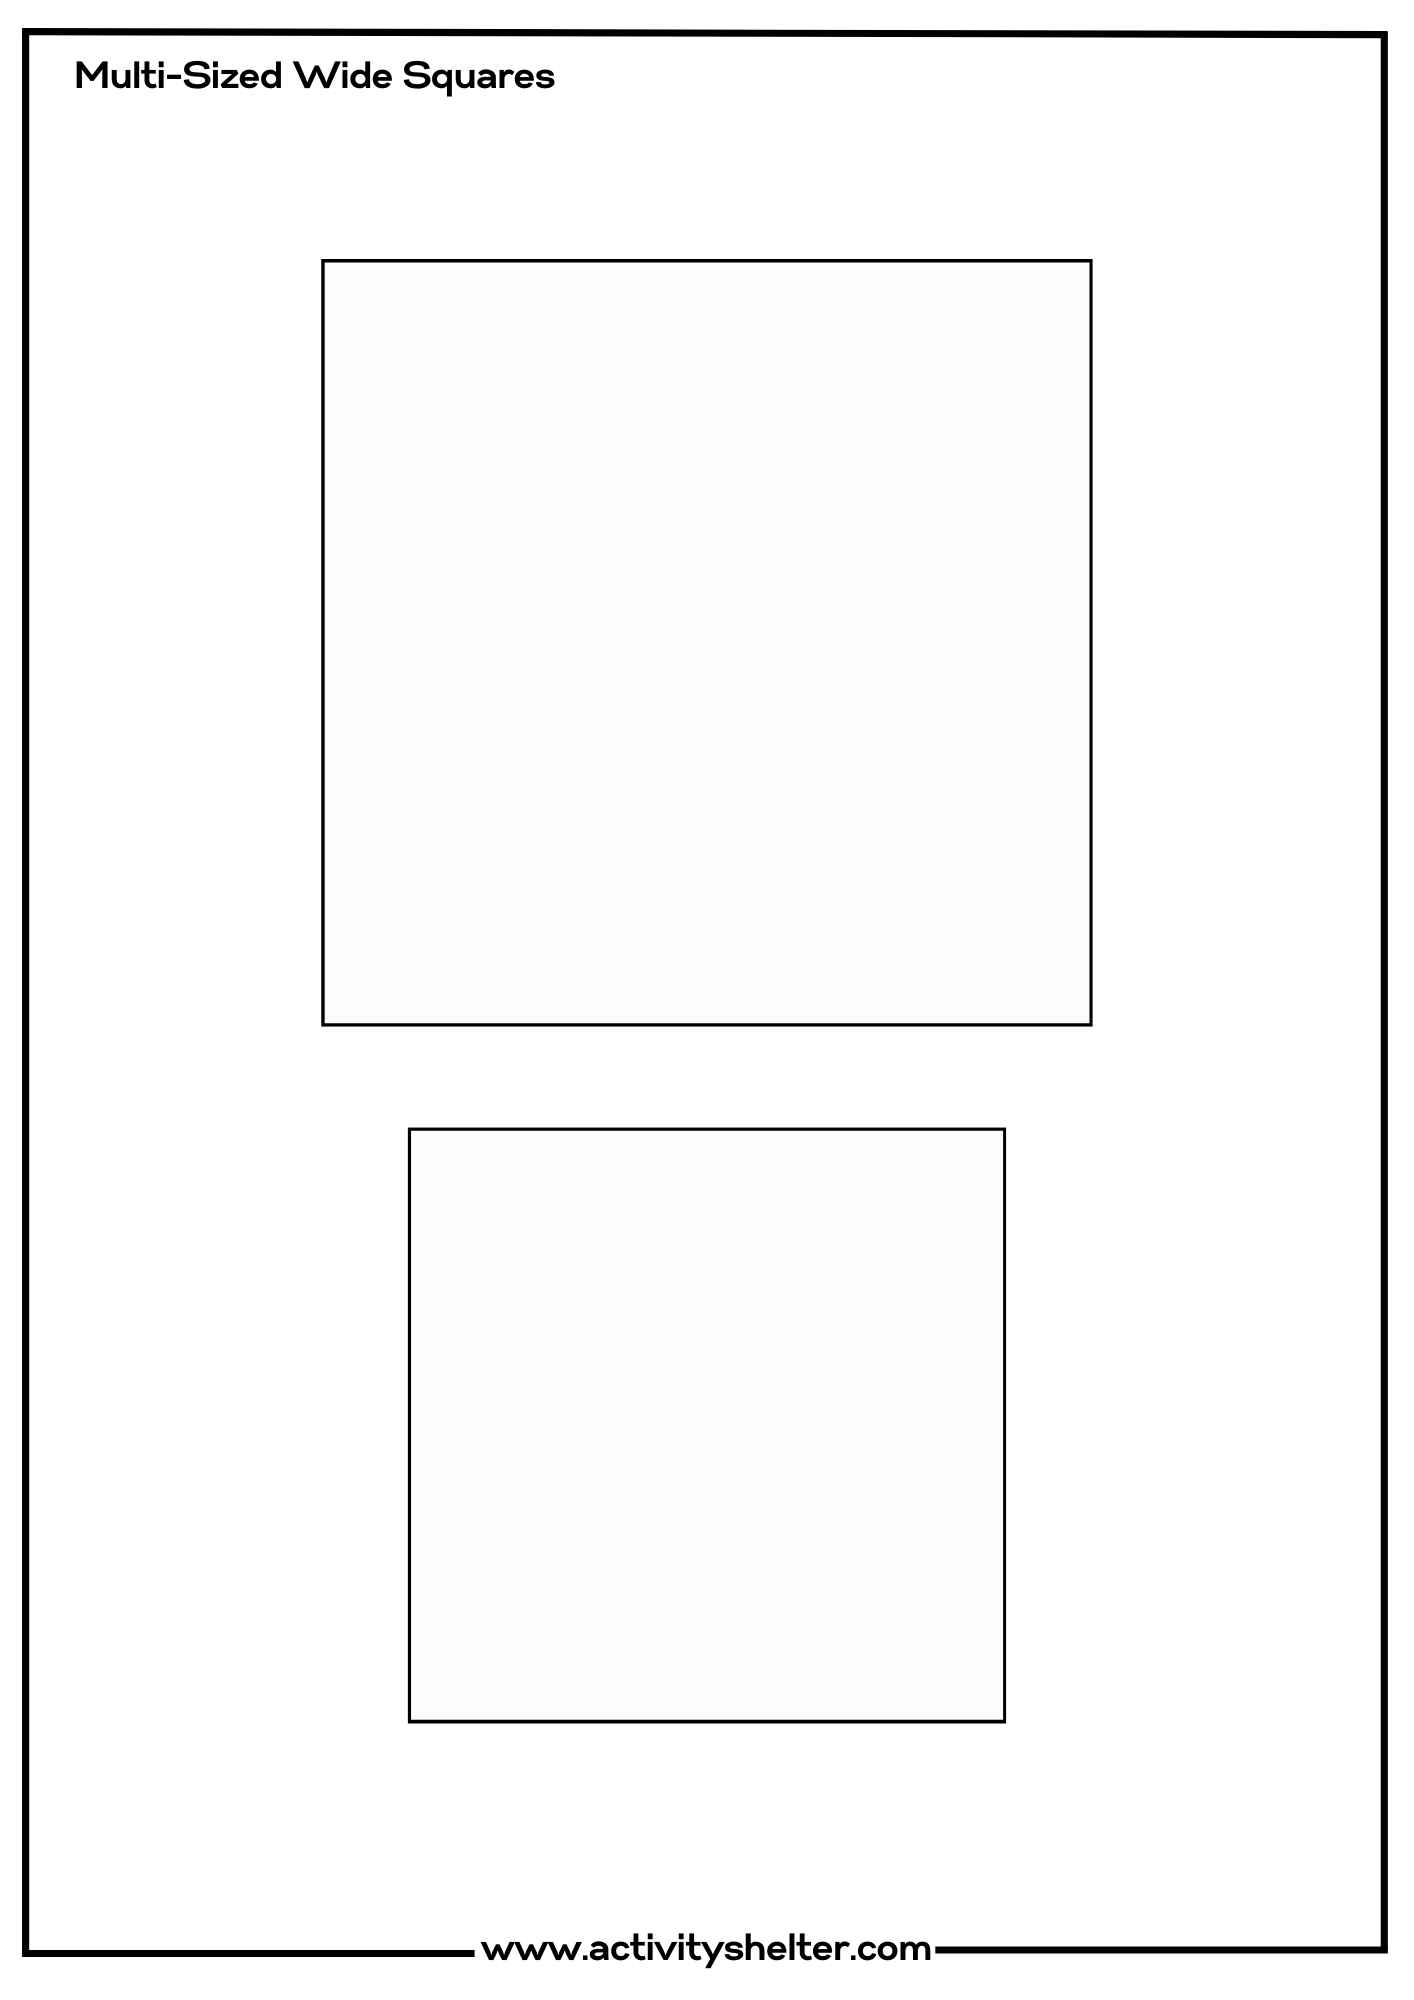 Square Template Printable Activity Shelter